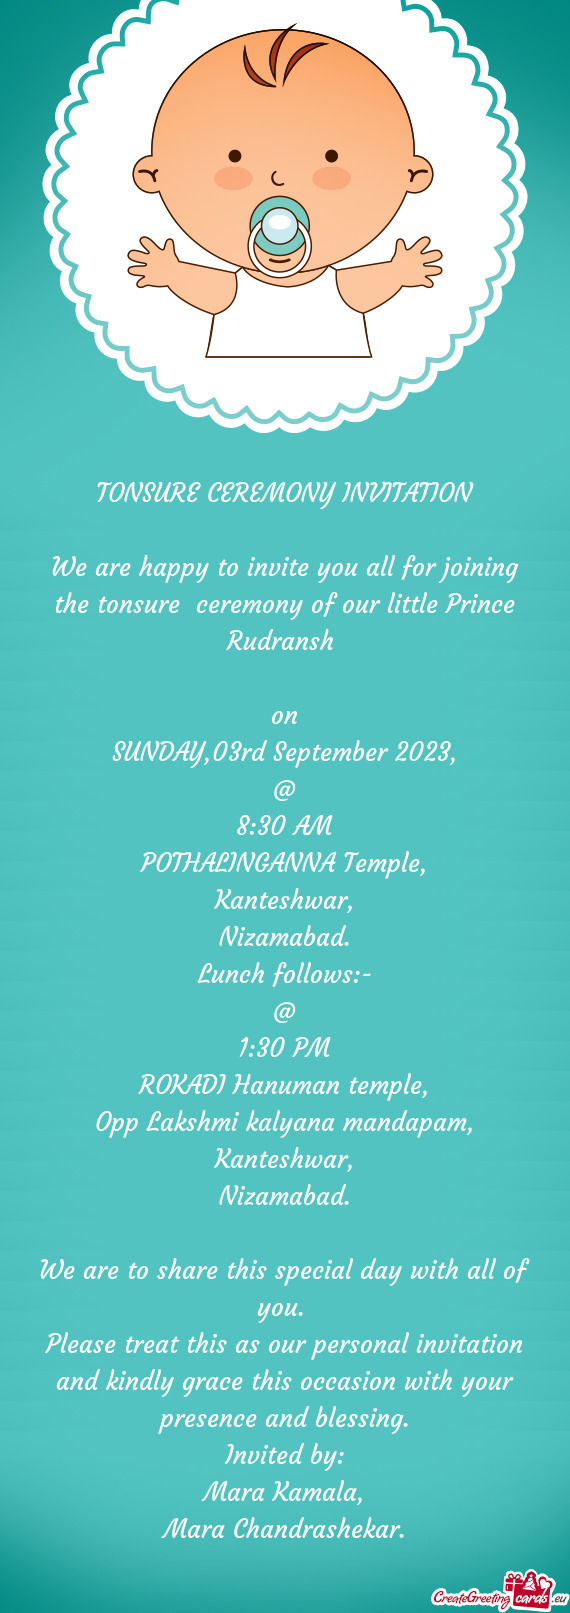 We are happy to invite you all for joining the tonsure ceremony of our little Prince Rudransh